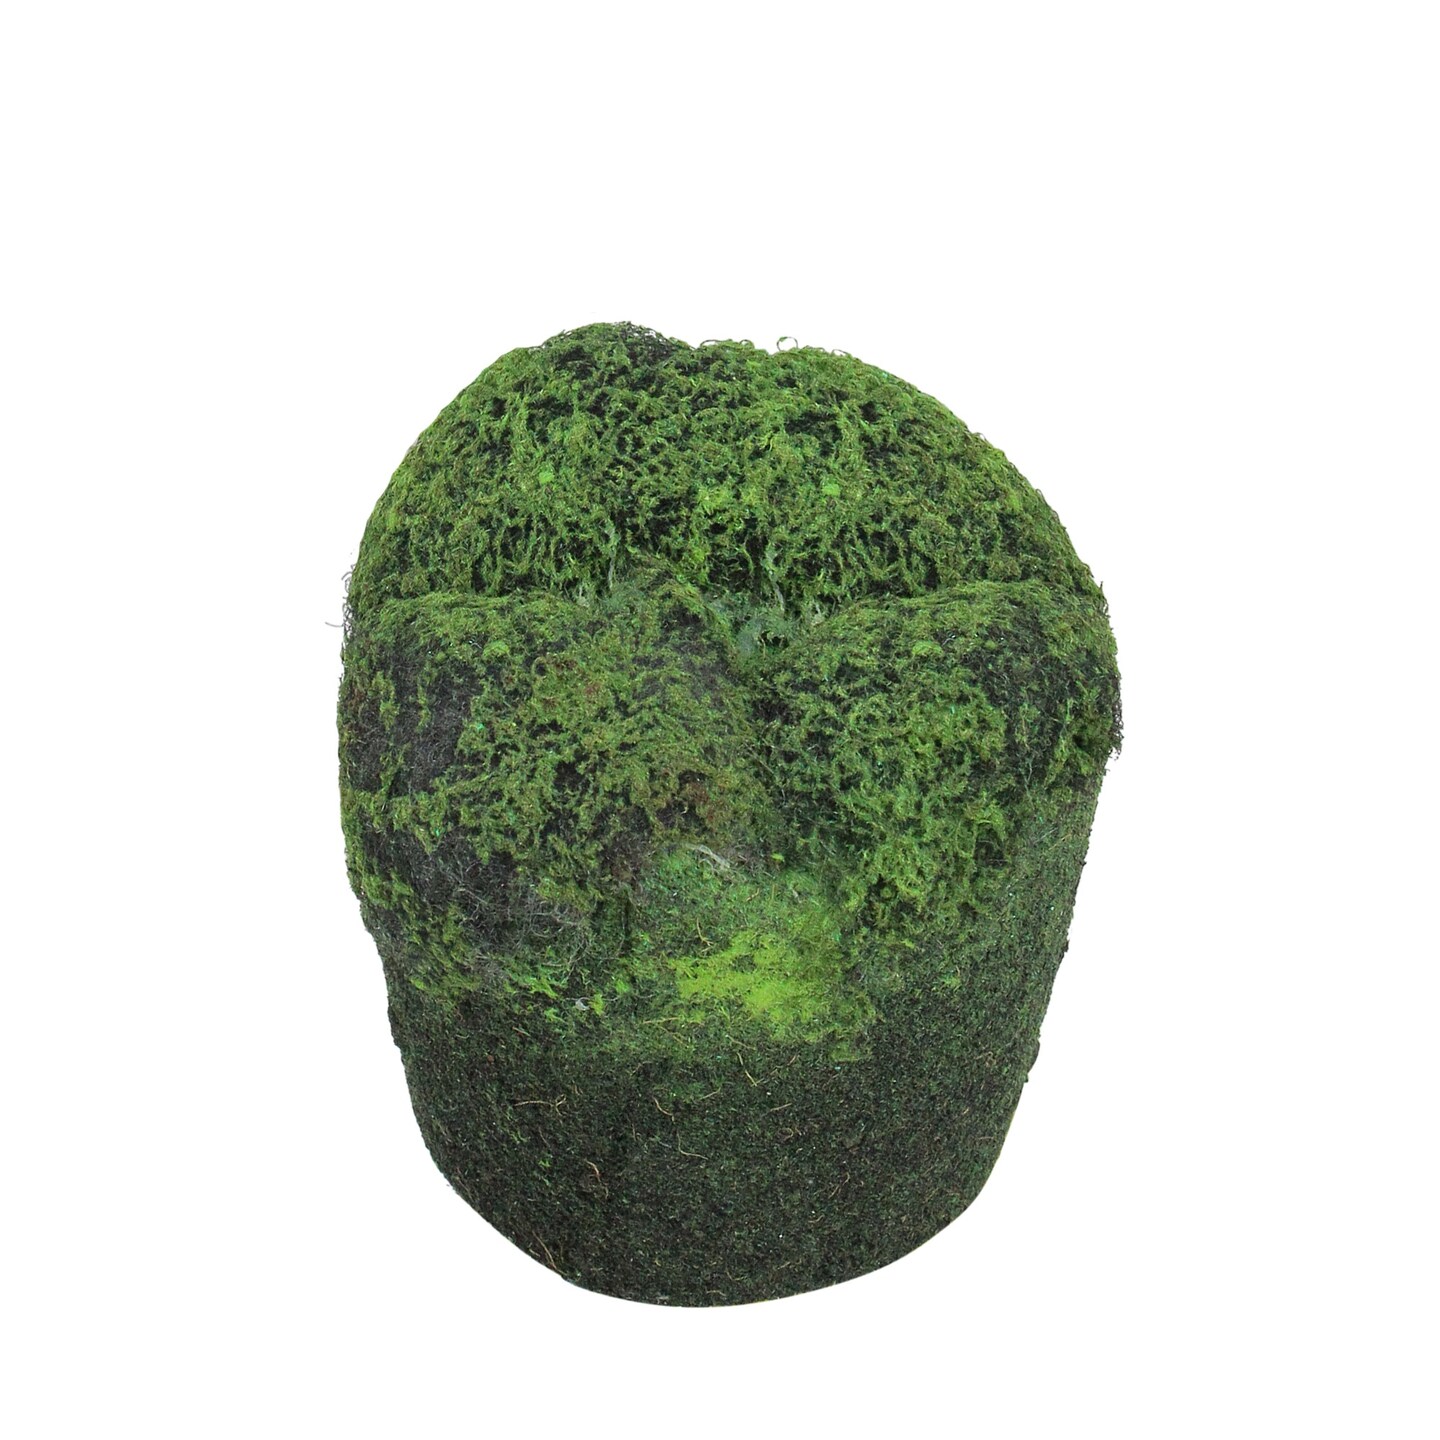 Allstate 3.5 Green and Black Artificial Moss Christmas Soil Planter